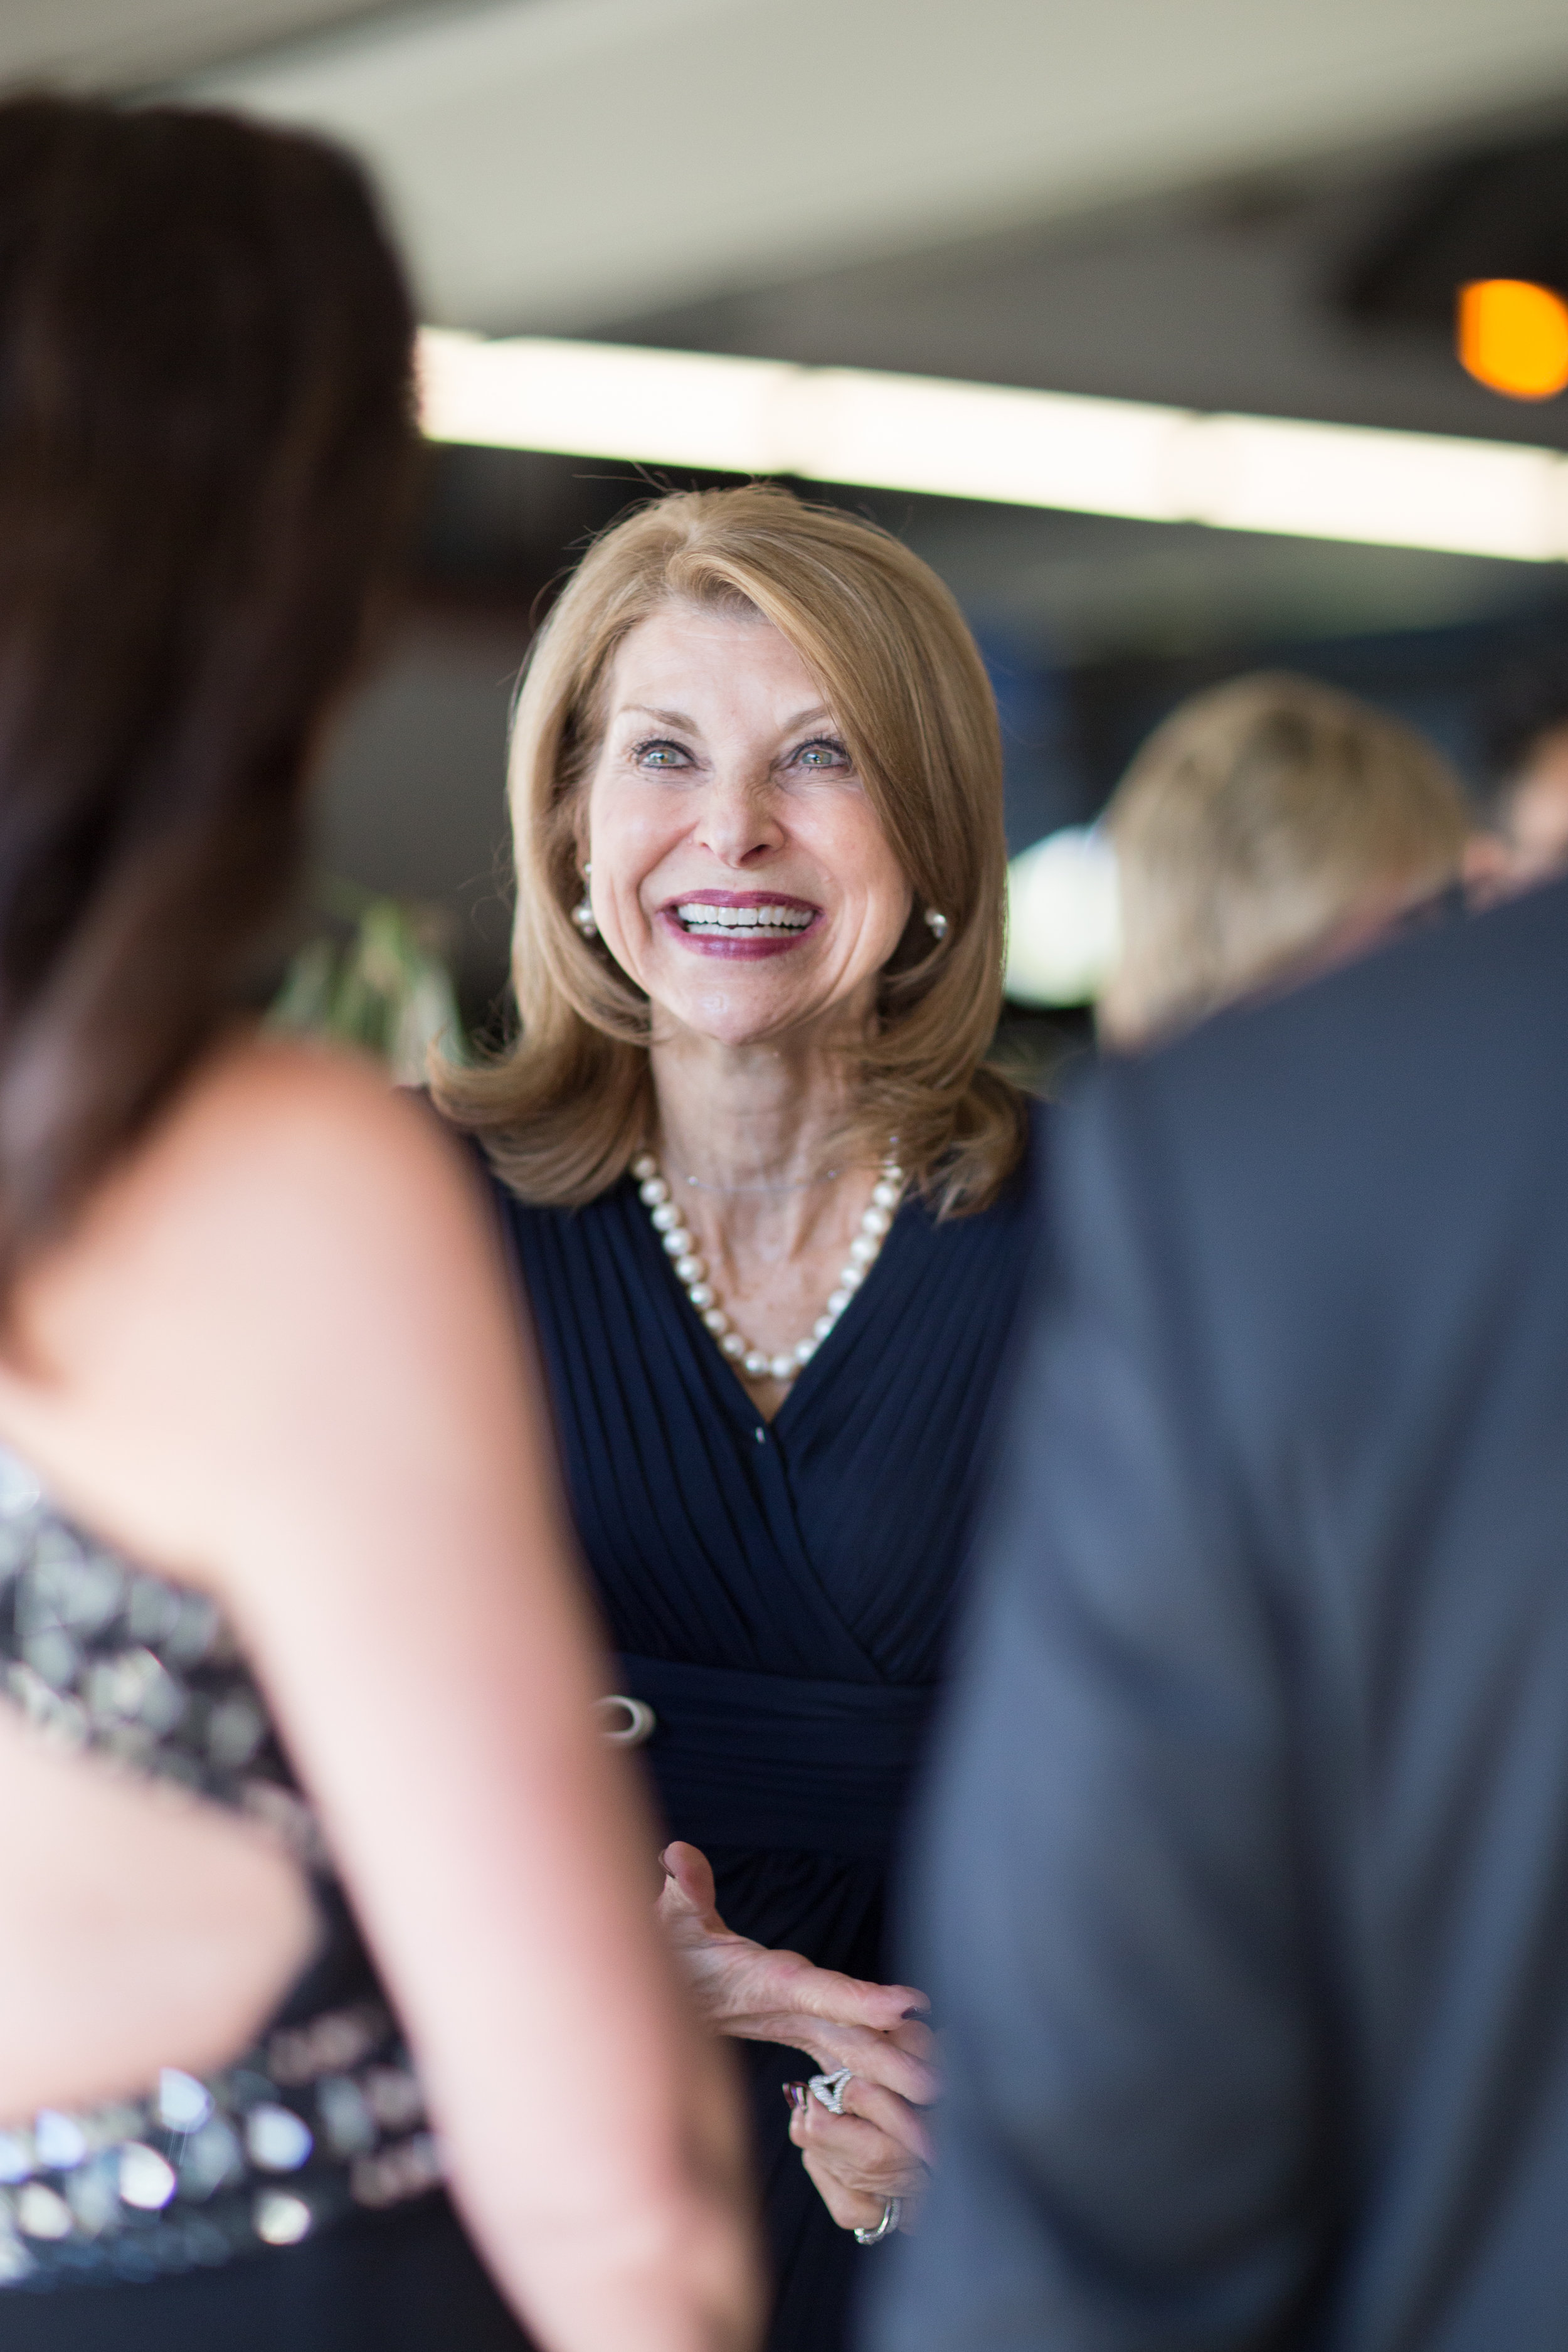   Pam Tebow shares a fabulous smile with gala attendees  